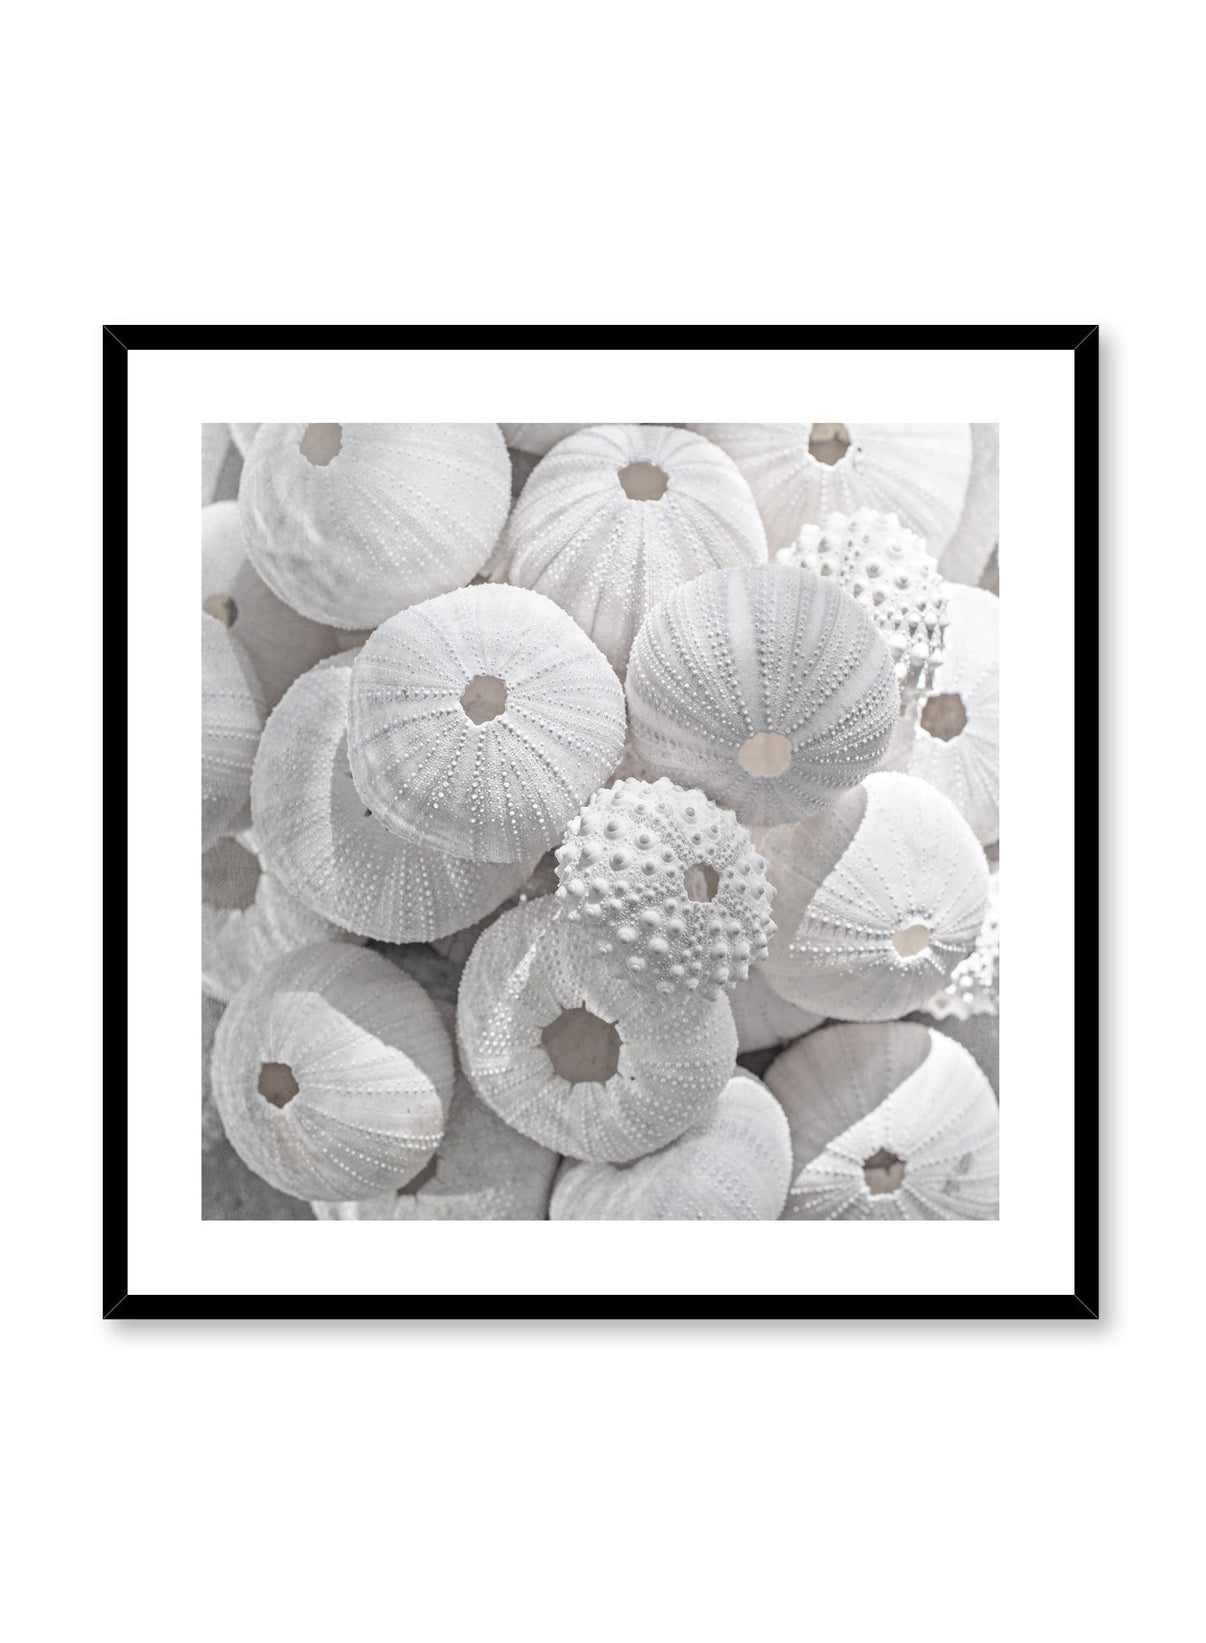 Sea Treasures Photography Poster | Buy Art Prints at Opposite Wall